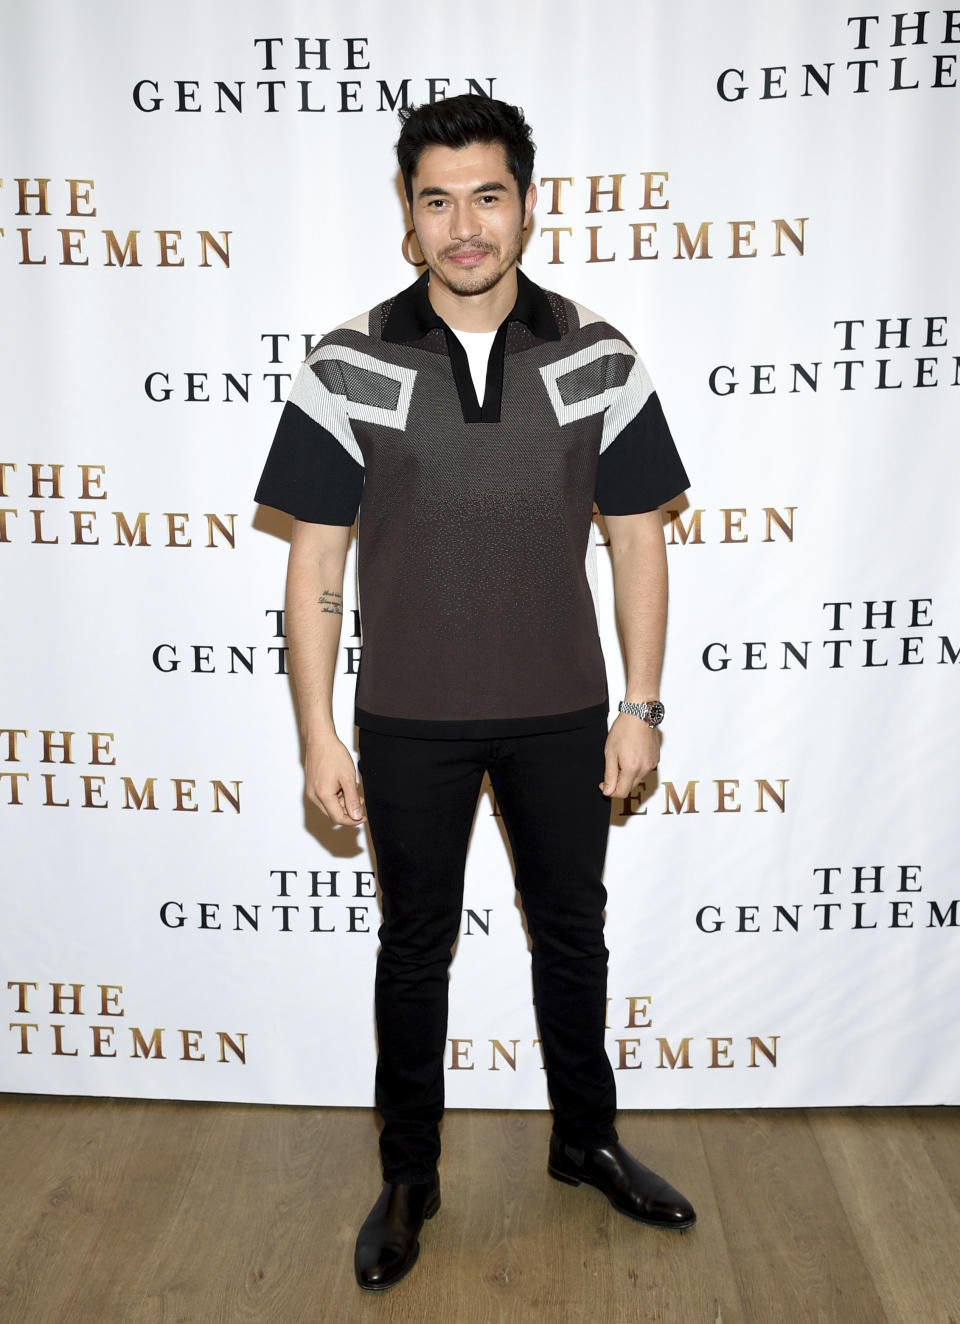 FILE - Henry Golding participates in "The Gentlemen" cast photo call on Jan. 11, 2020, in New York. Golding turns 35 on Feb. 5. (Photo by Evan Agostini/Invision/AP, File)